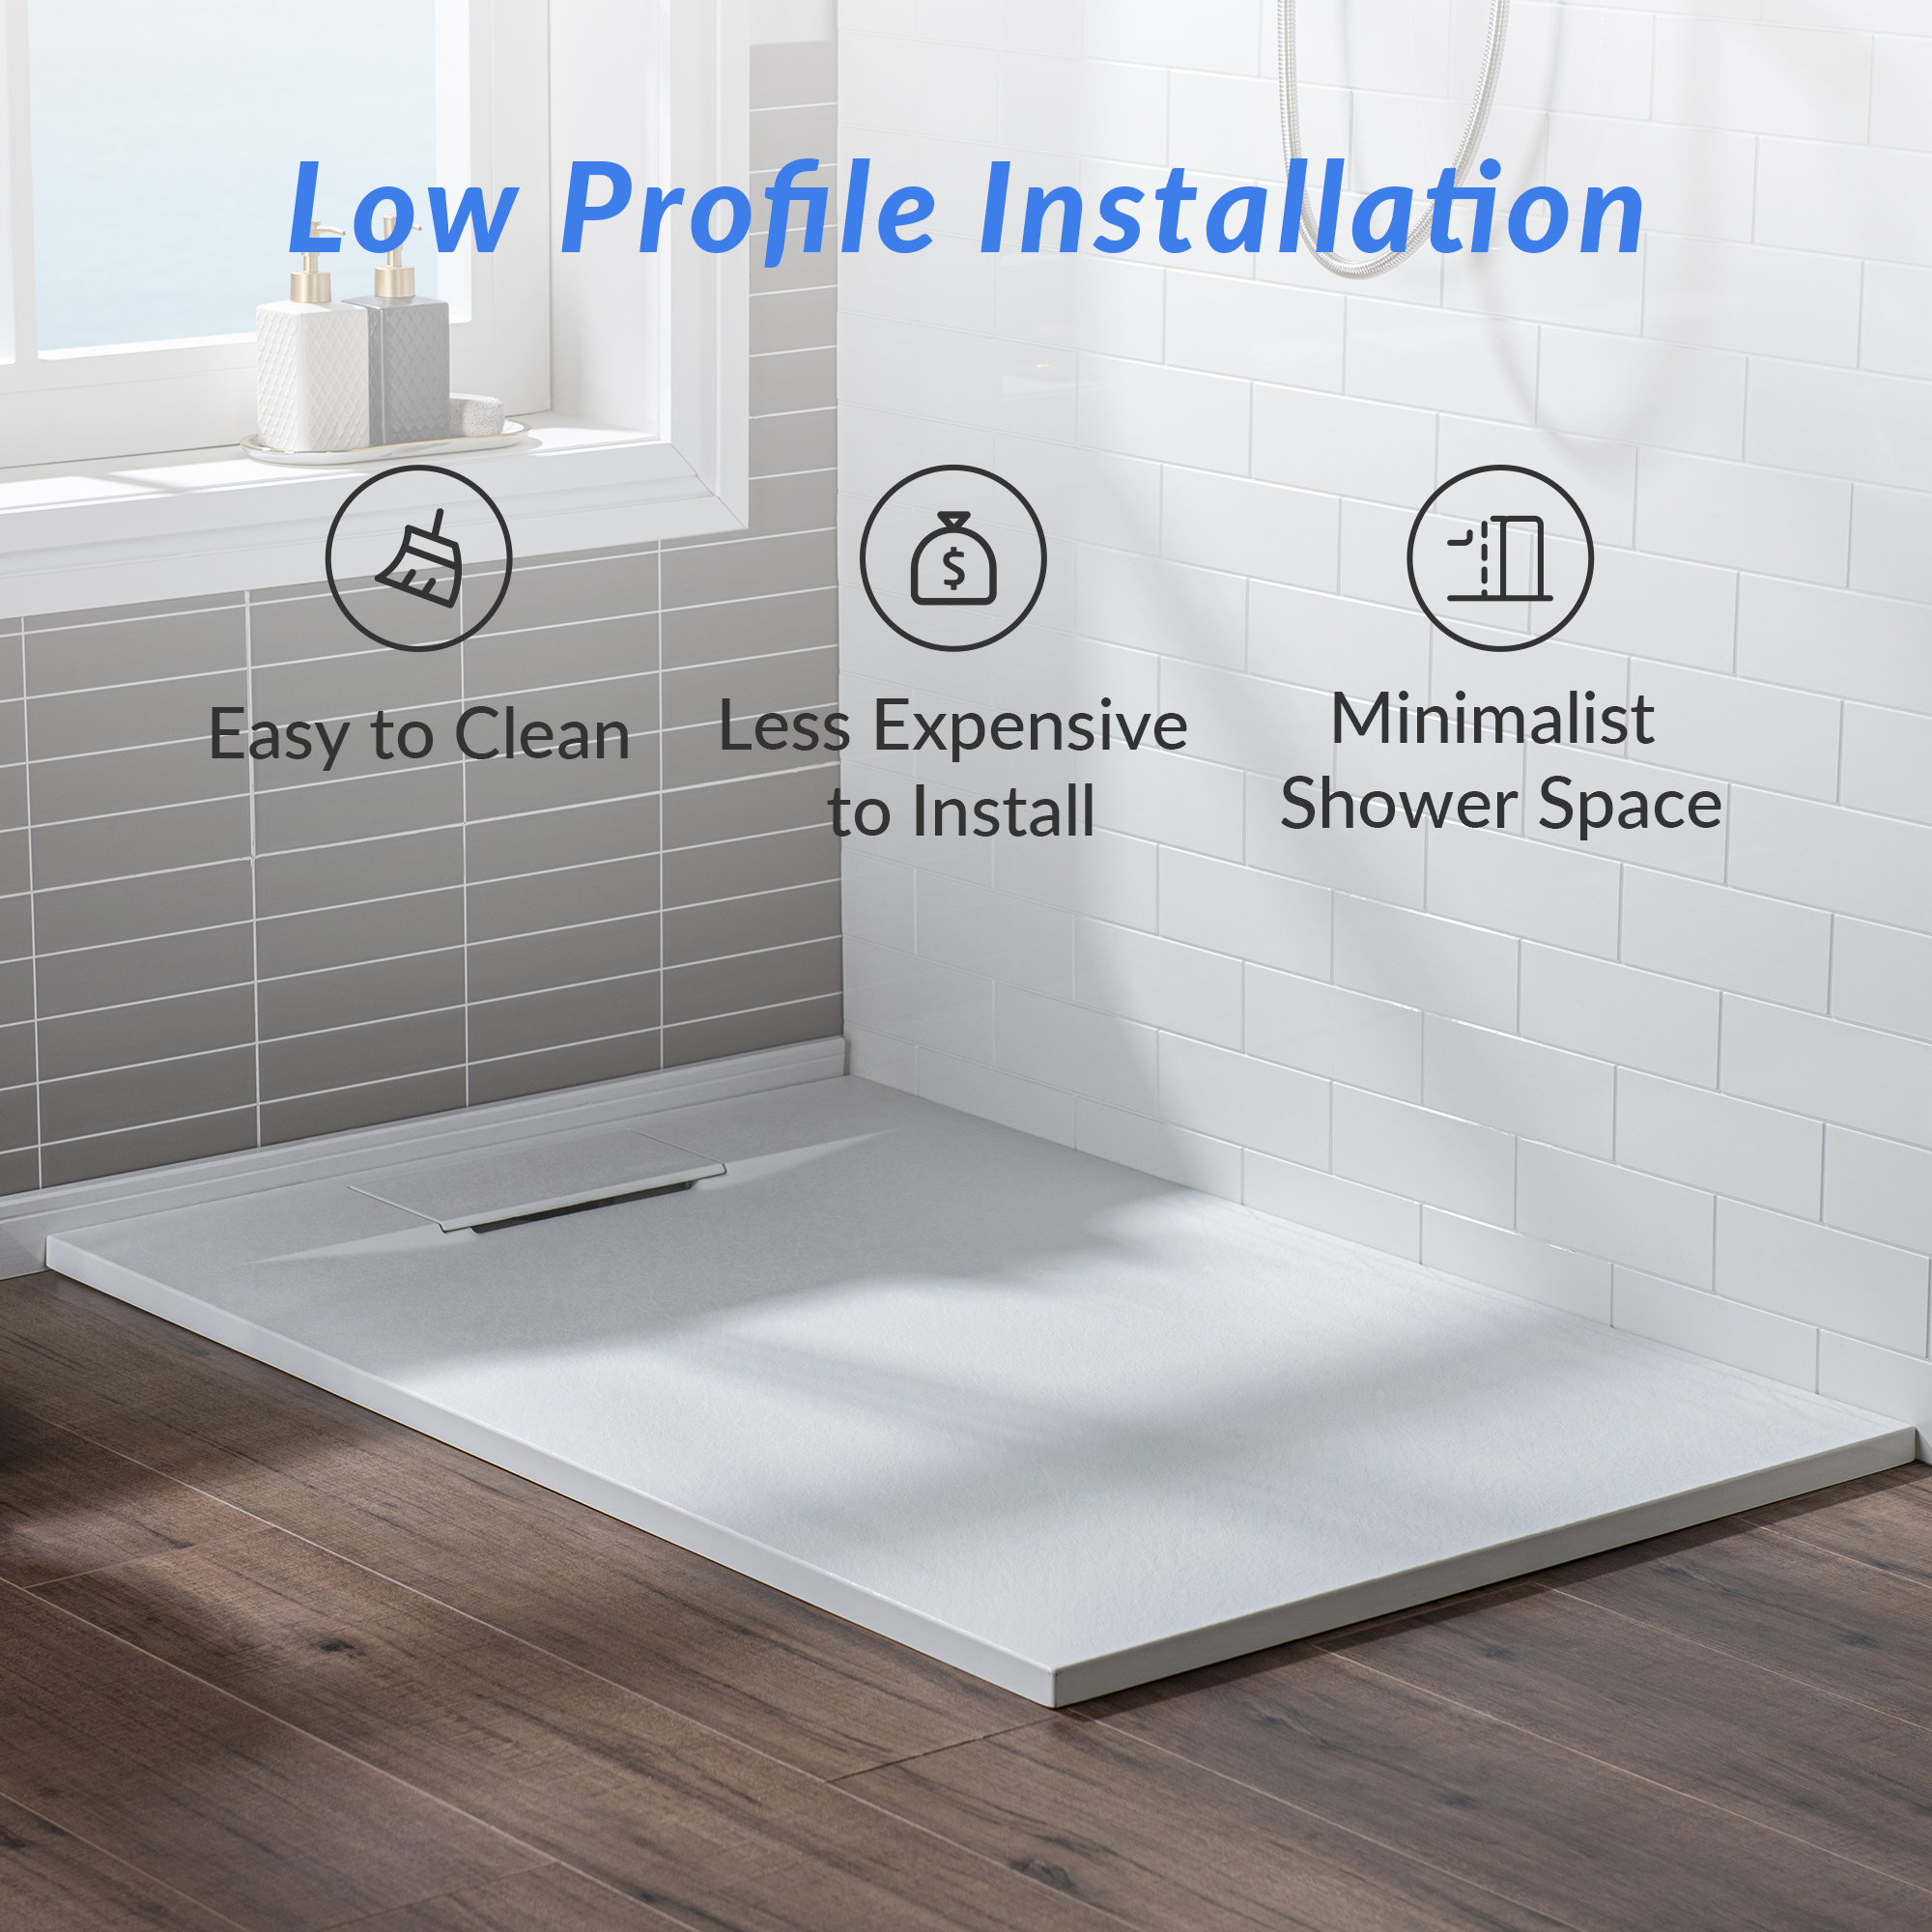  WOODBRIDGE 60-in L x 36-in W Zero Threshold End Drain Shower Base with Reversable Drain Placement, Matching Decorative Drain Plate and Tile Flange, Wheel Chair Access, Low Profile, White_12431